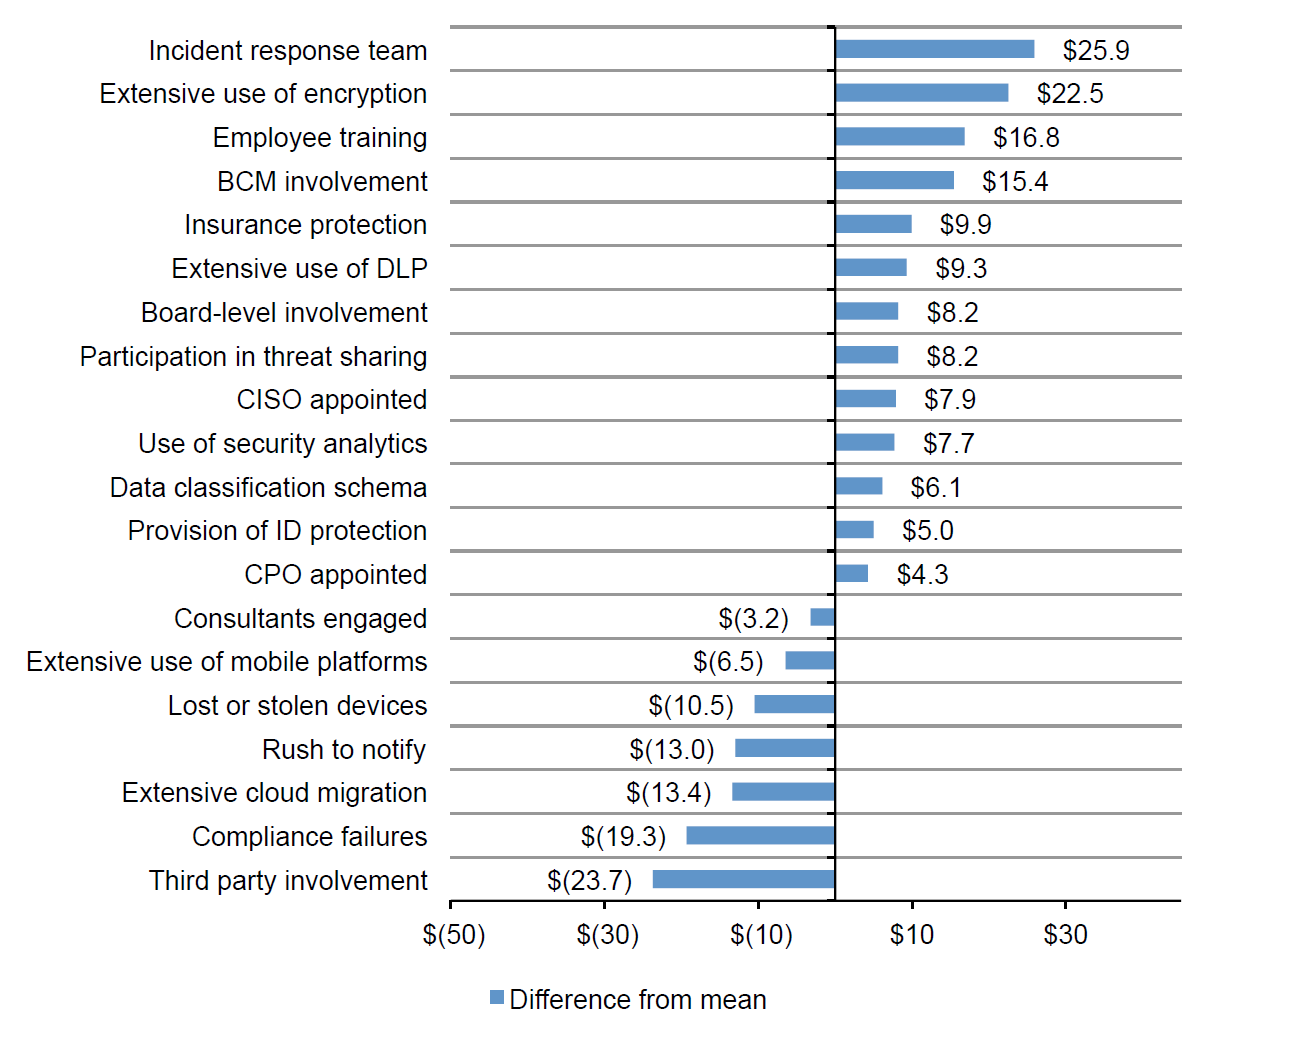 Impact of 20 factors on the per capita cost of data breach, taken from the Ponemon Institute 2017 Cost of Data Breach Study